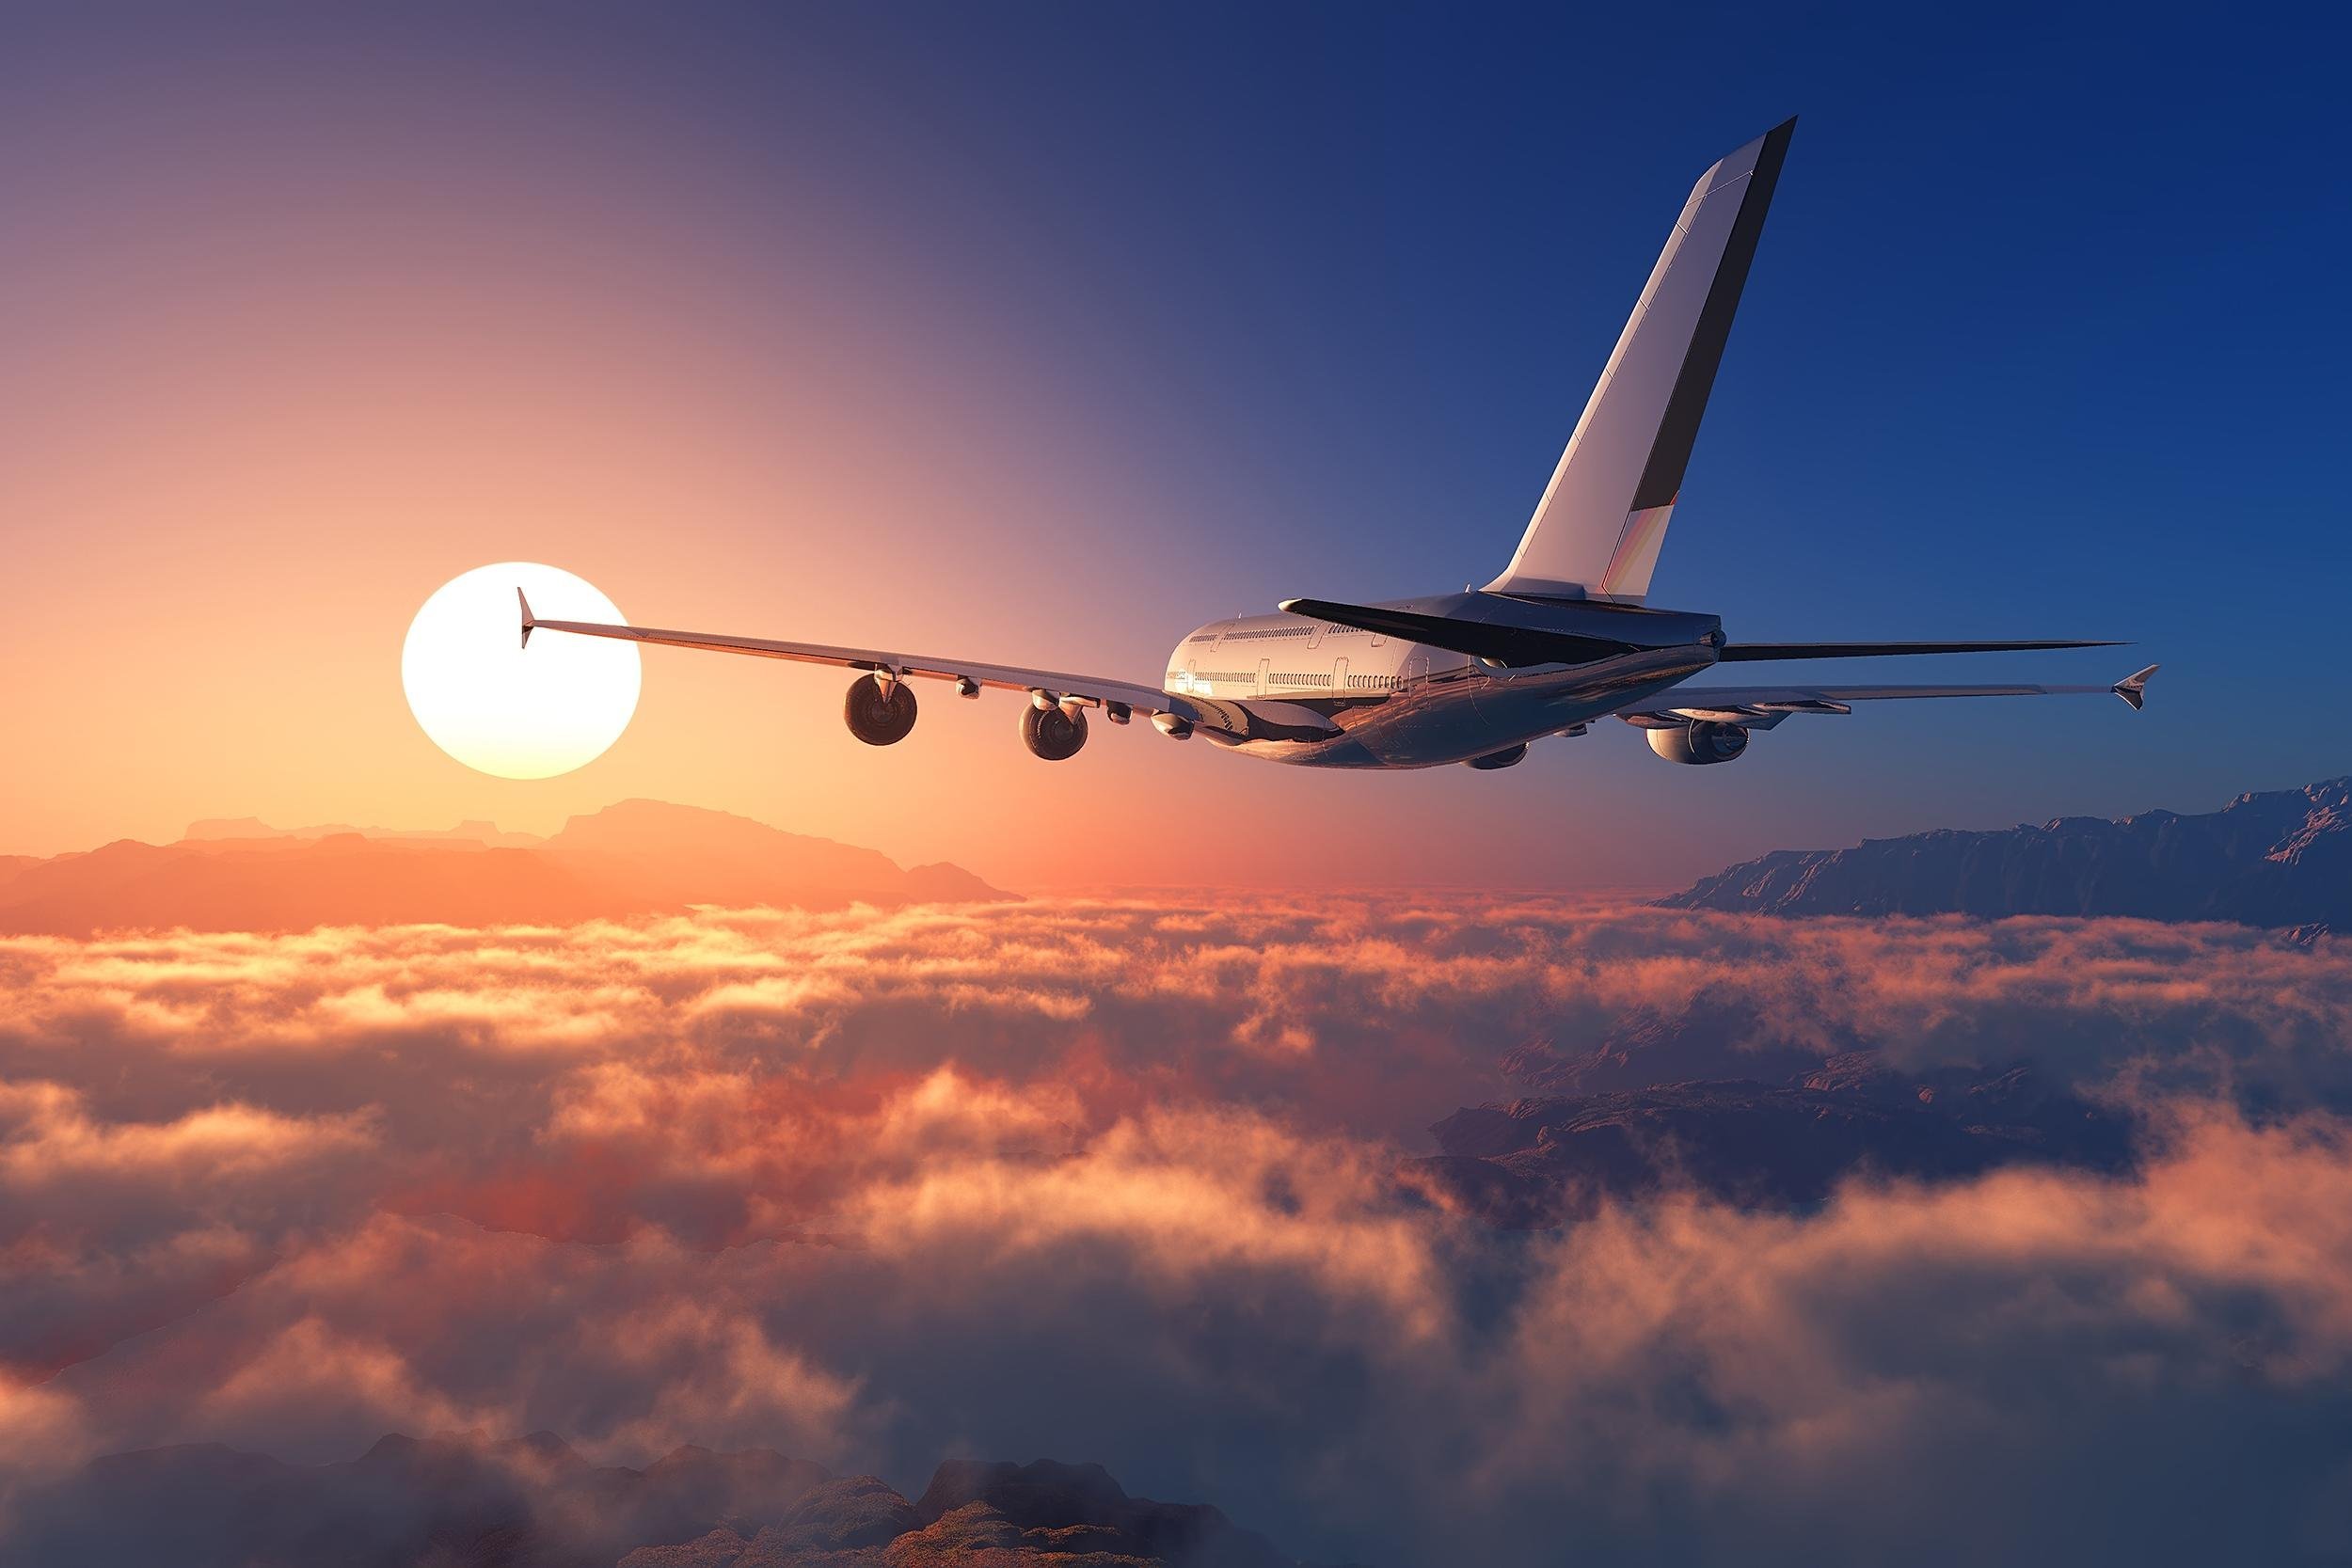 <p>Frequent flyer programs aren't just for frequent flyers. It's free to sign up when you book a flight; miles and points on many airlines don't expire; and travelers can add to their totals steadily in many ways besides flying. Start working toward an upgrade or free flight on every airline you fly.</p>